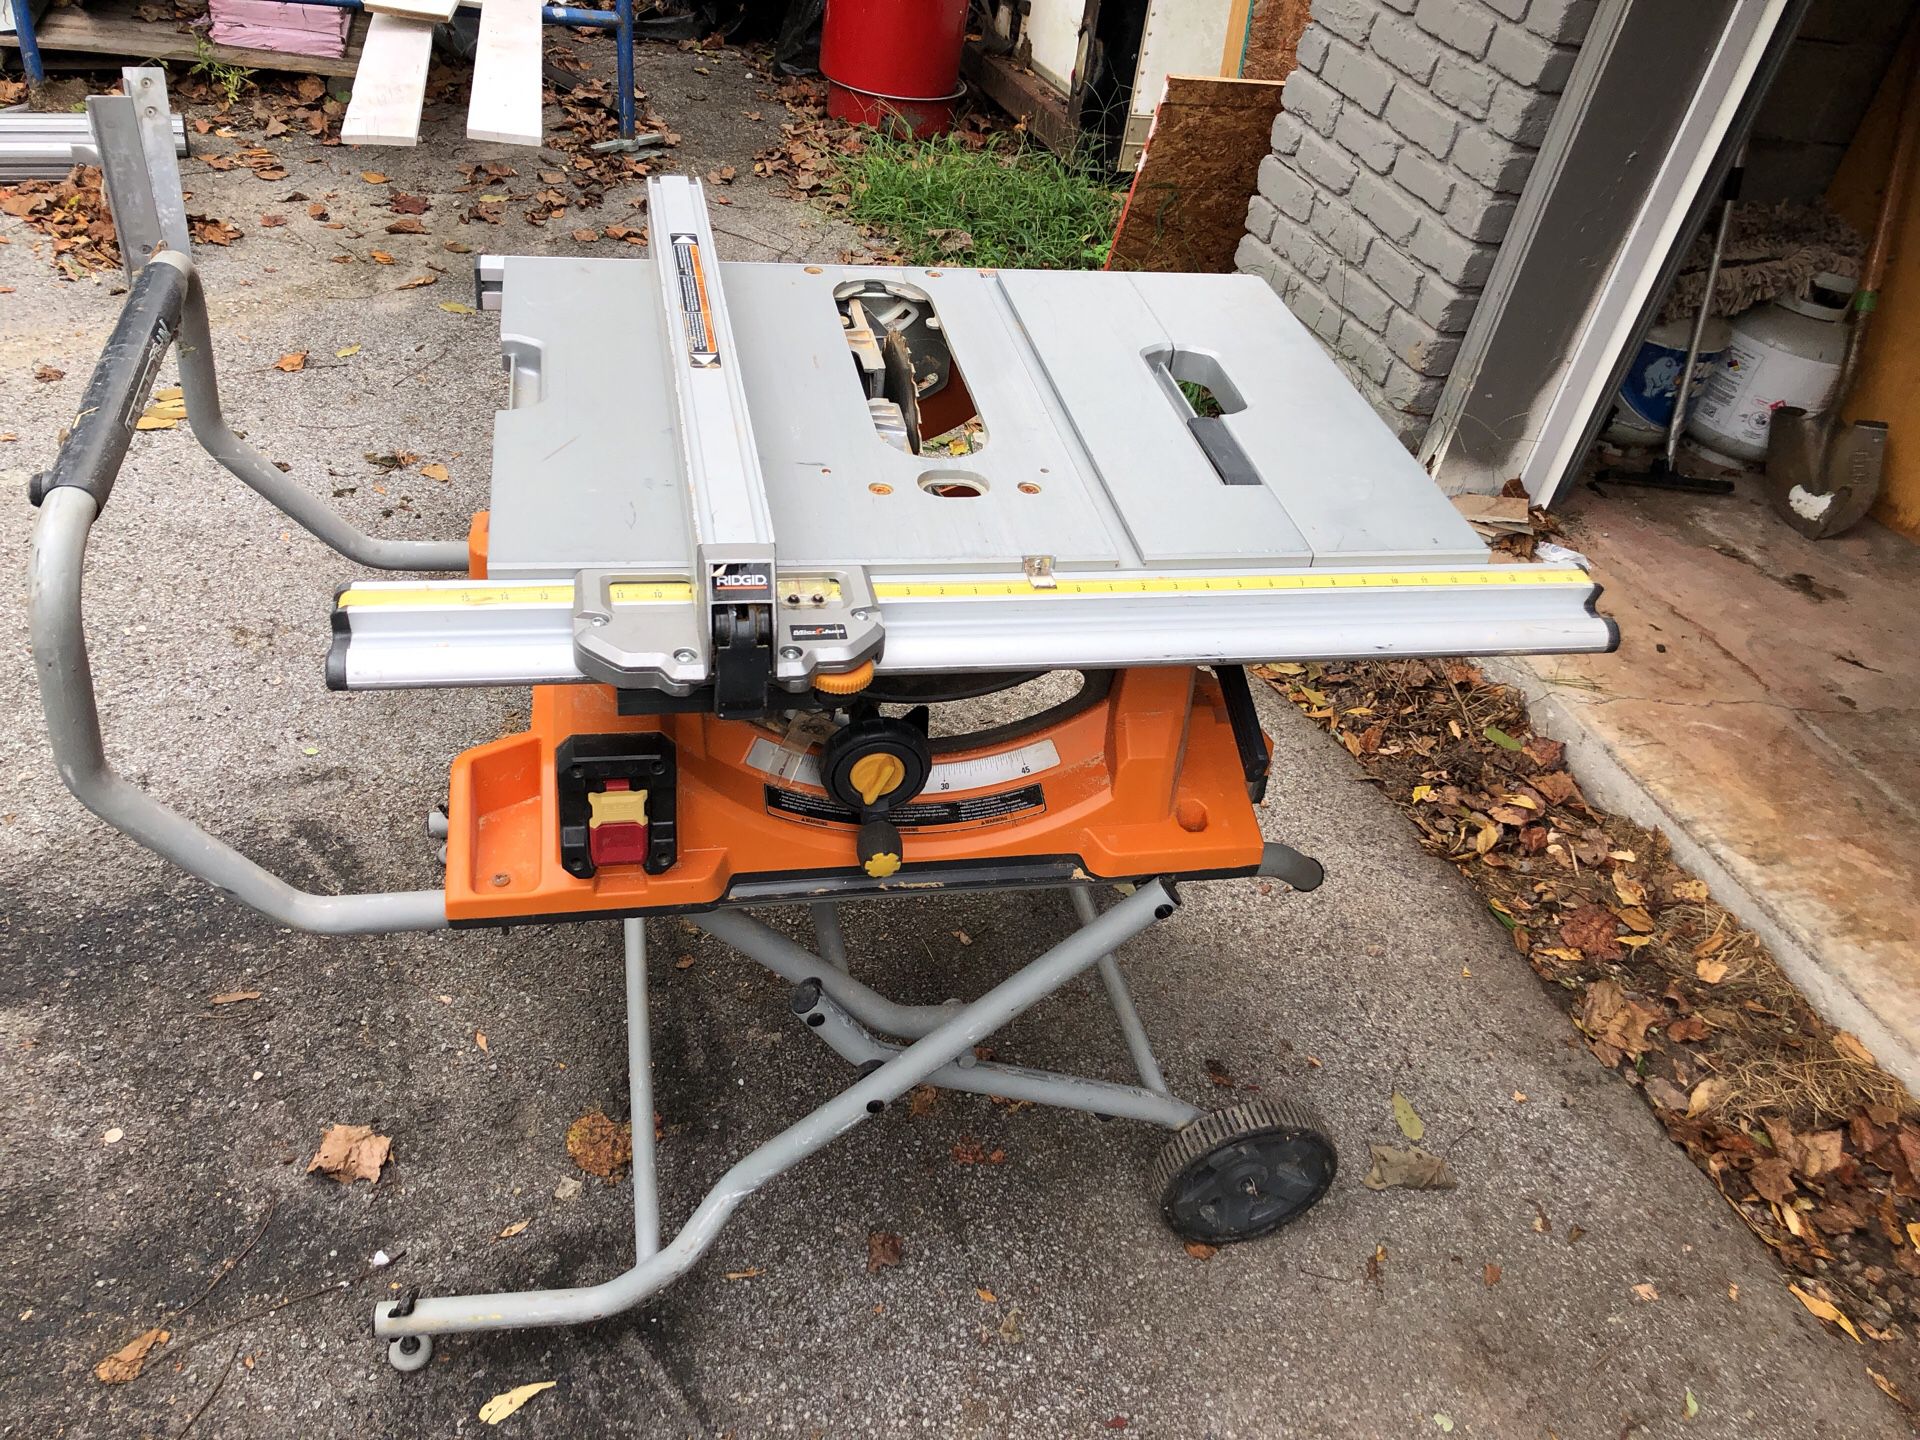 Table saw from Home Depot